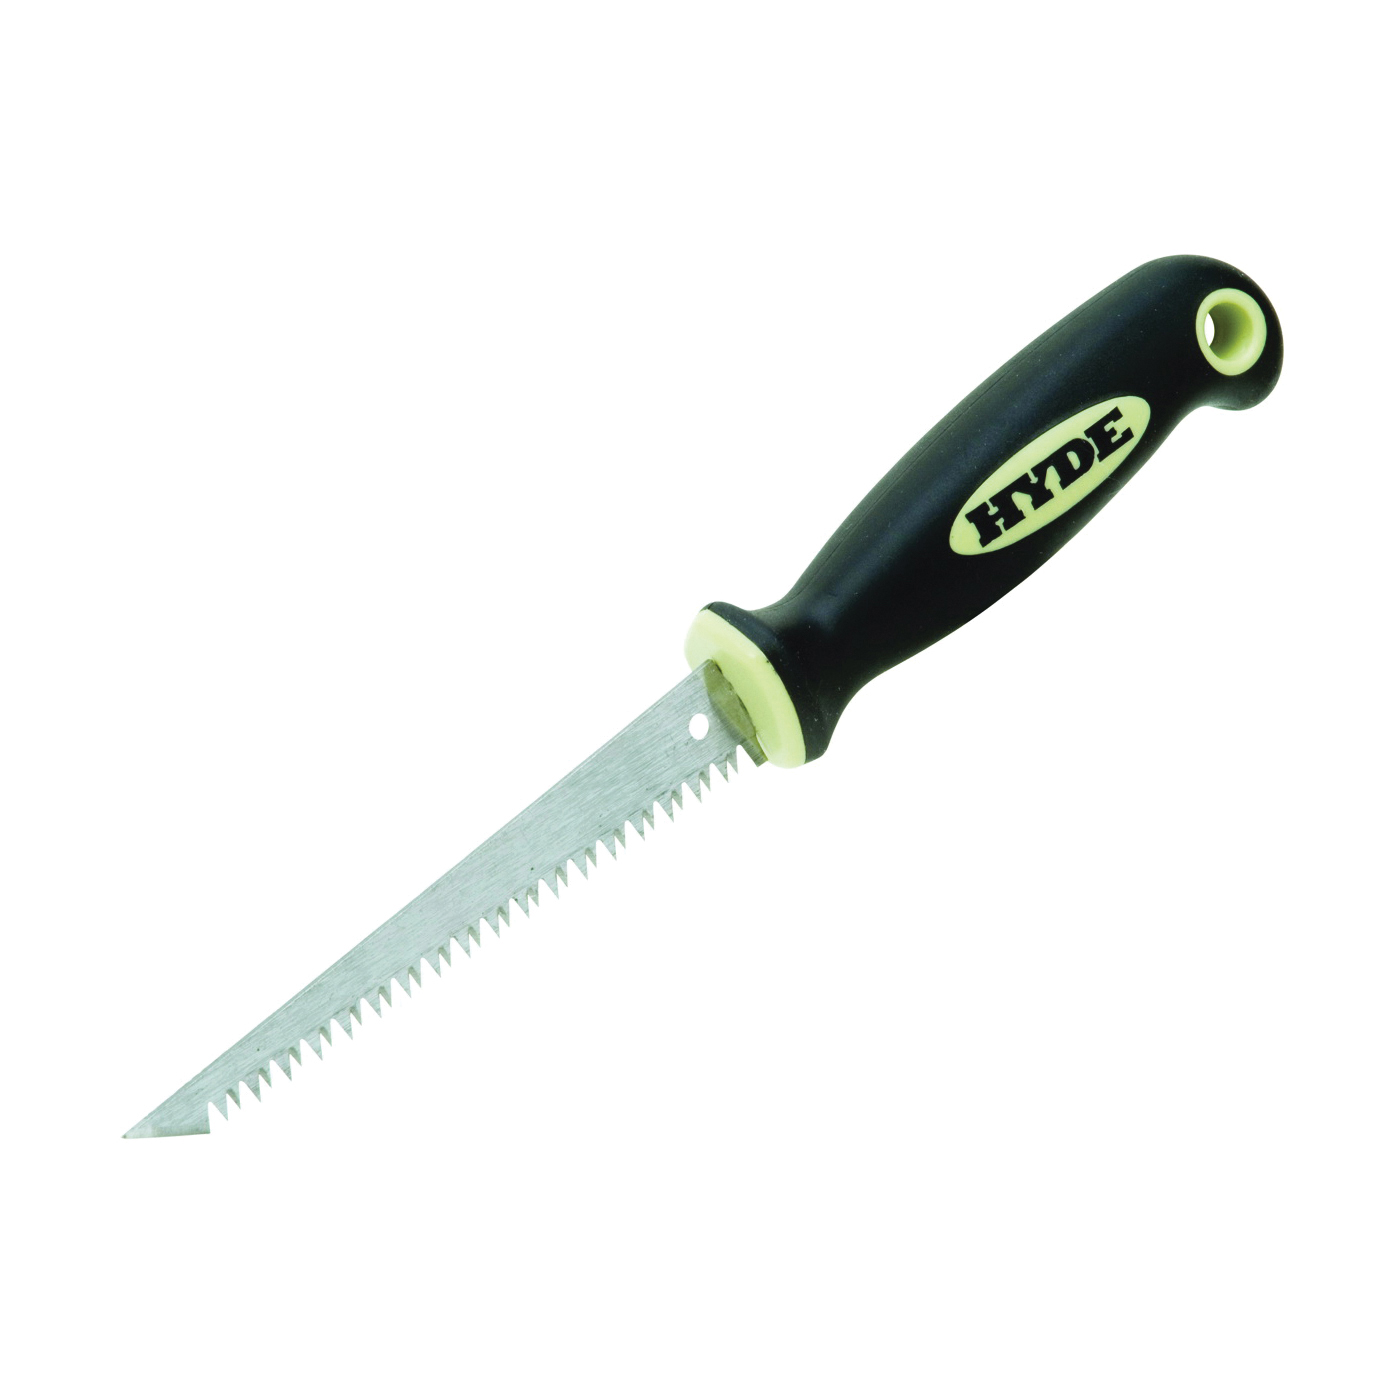 MAXXGRIP PRO Series 09016 Jab Saw, 6 in L Blade, 1 in W Blade, HCS Blade, Overmolded Handle, Redwood Handle